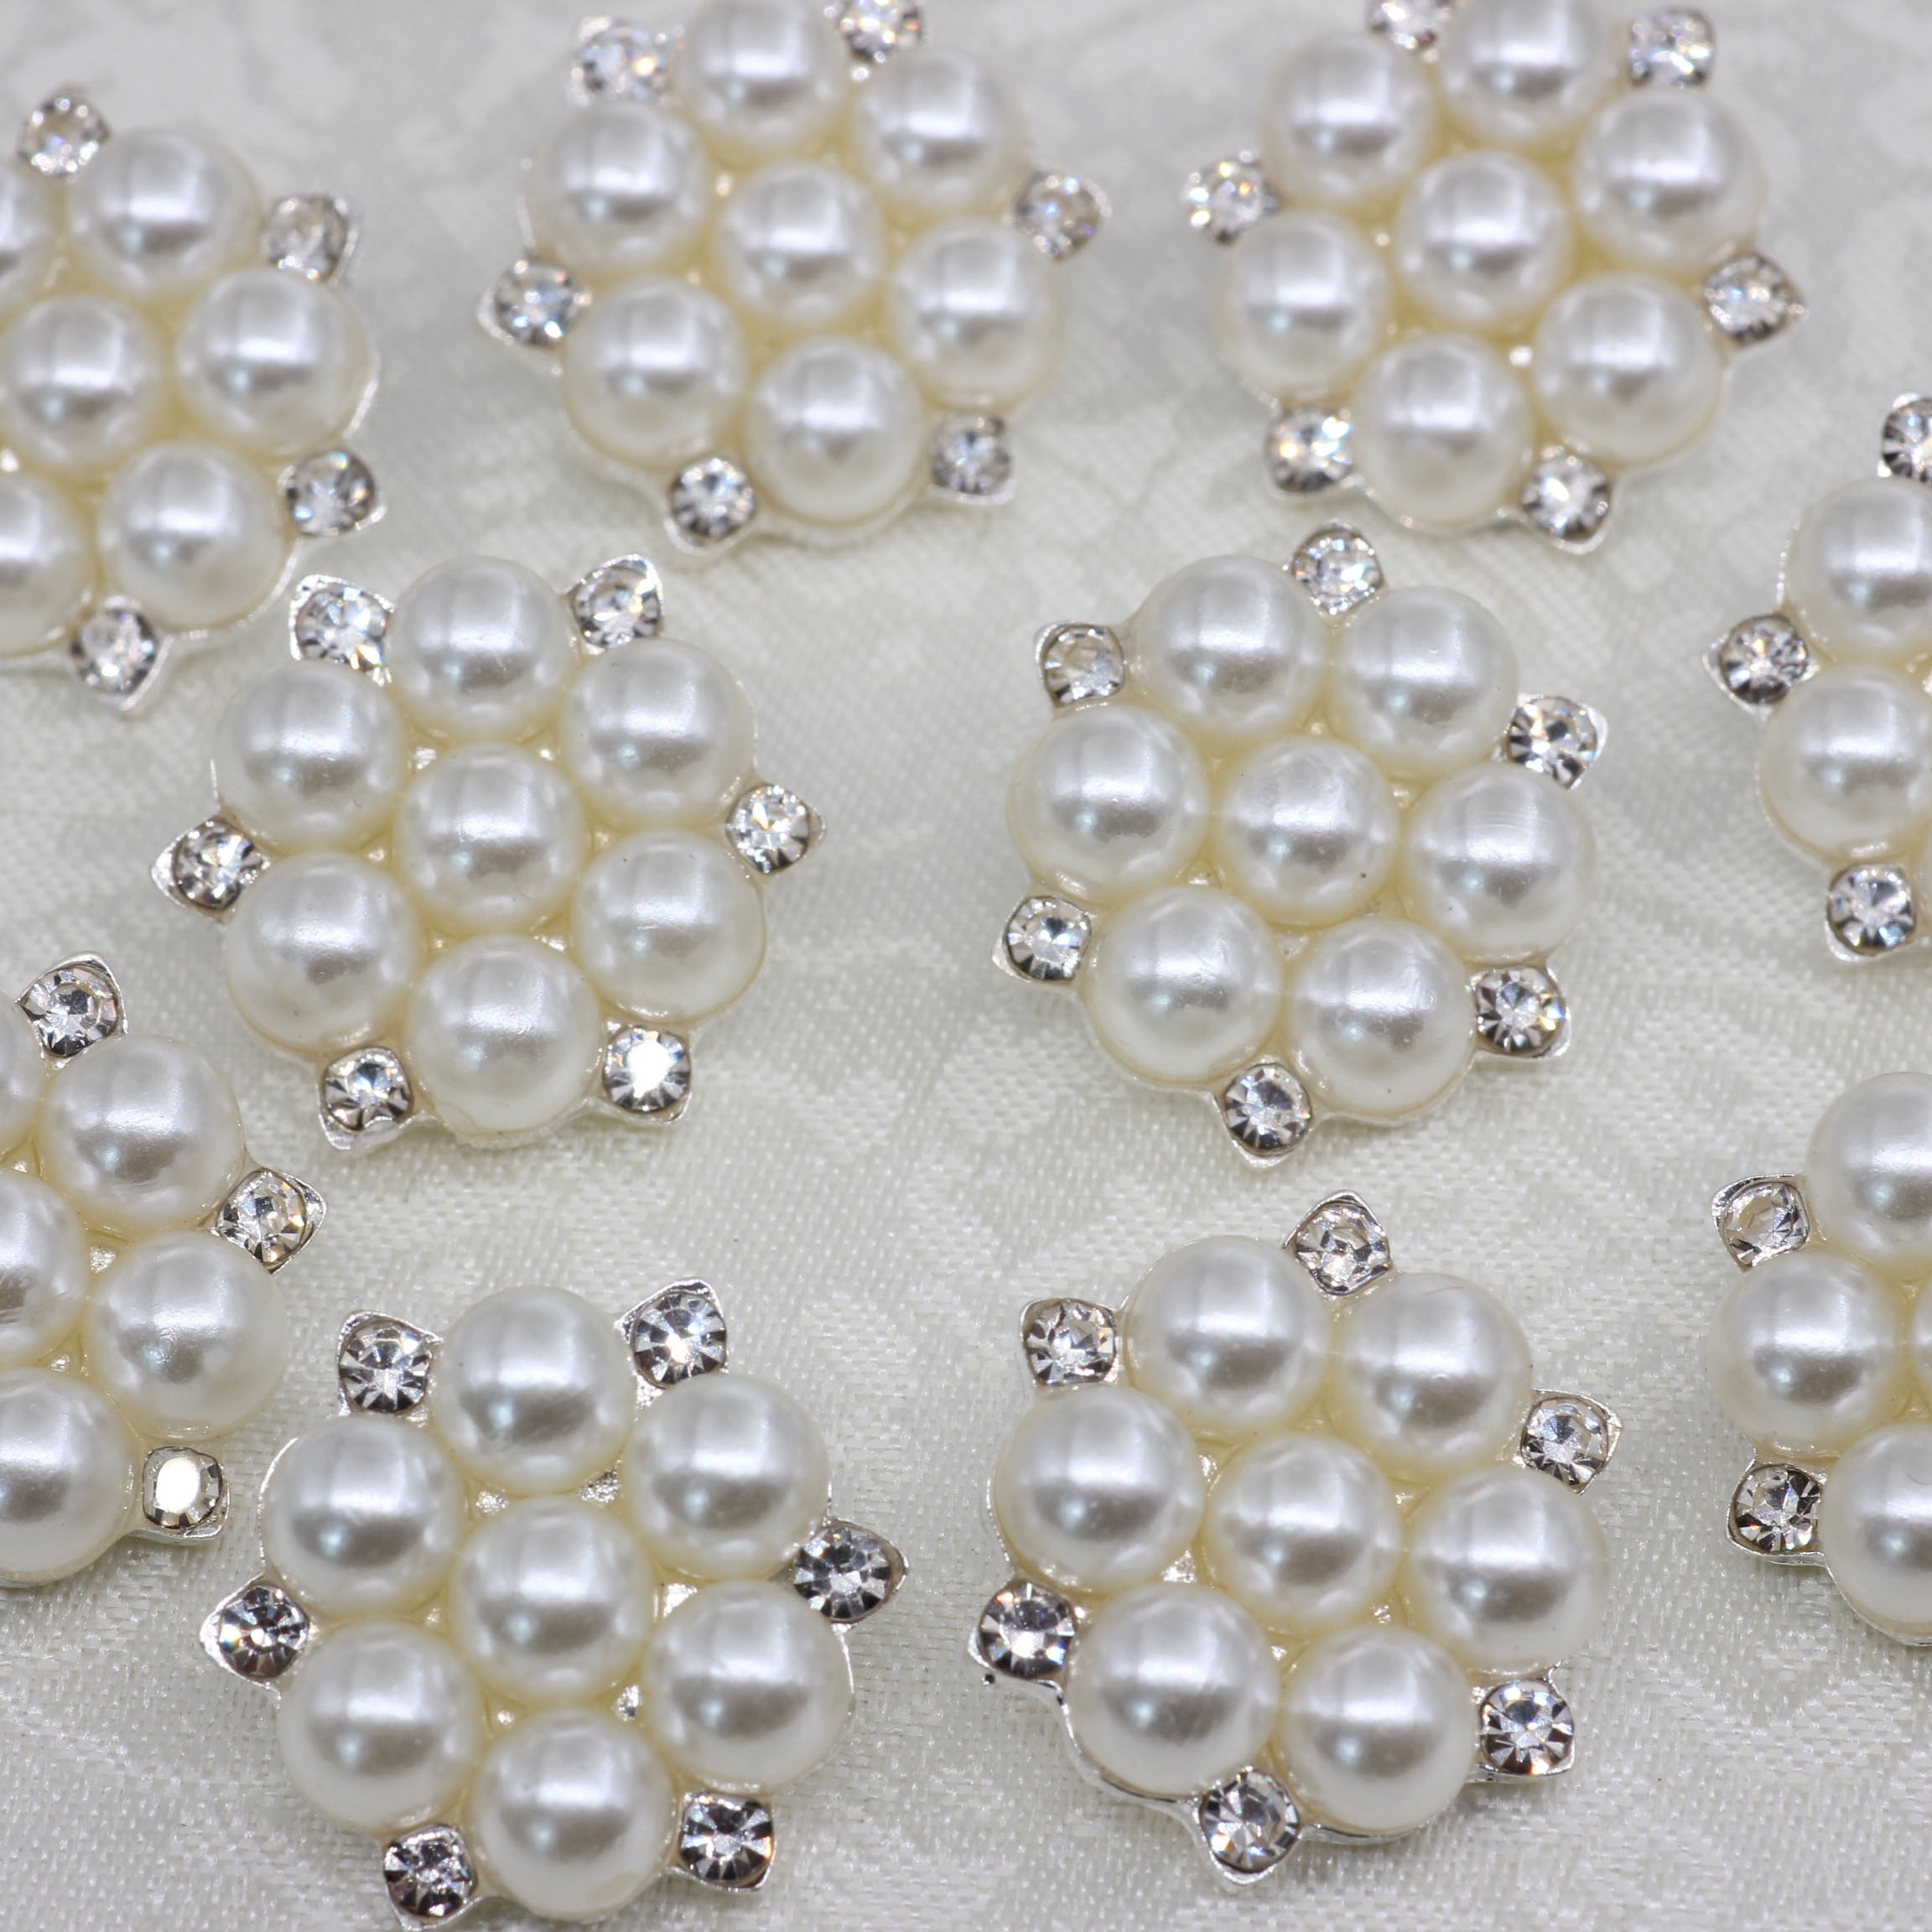 Best Deal for 20Pcs White Pearl Shank Button, Fancy Buttons, Sew